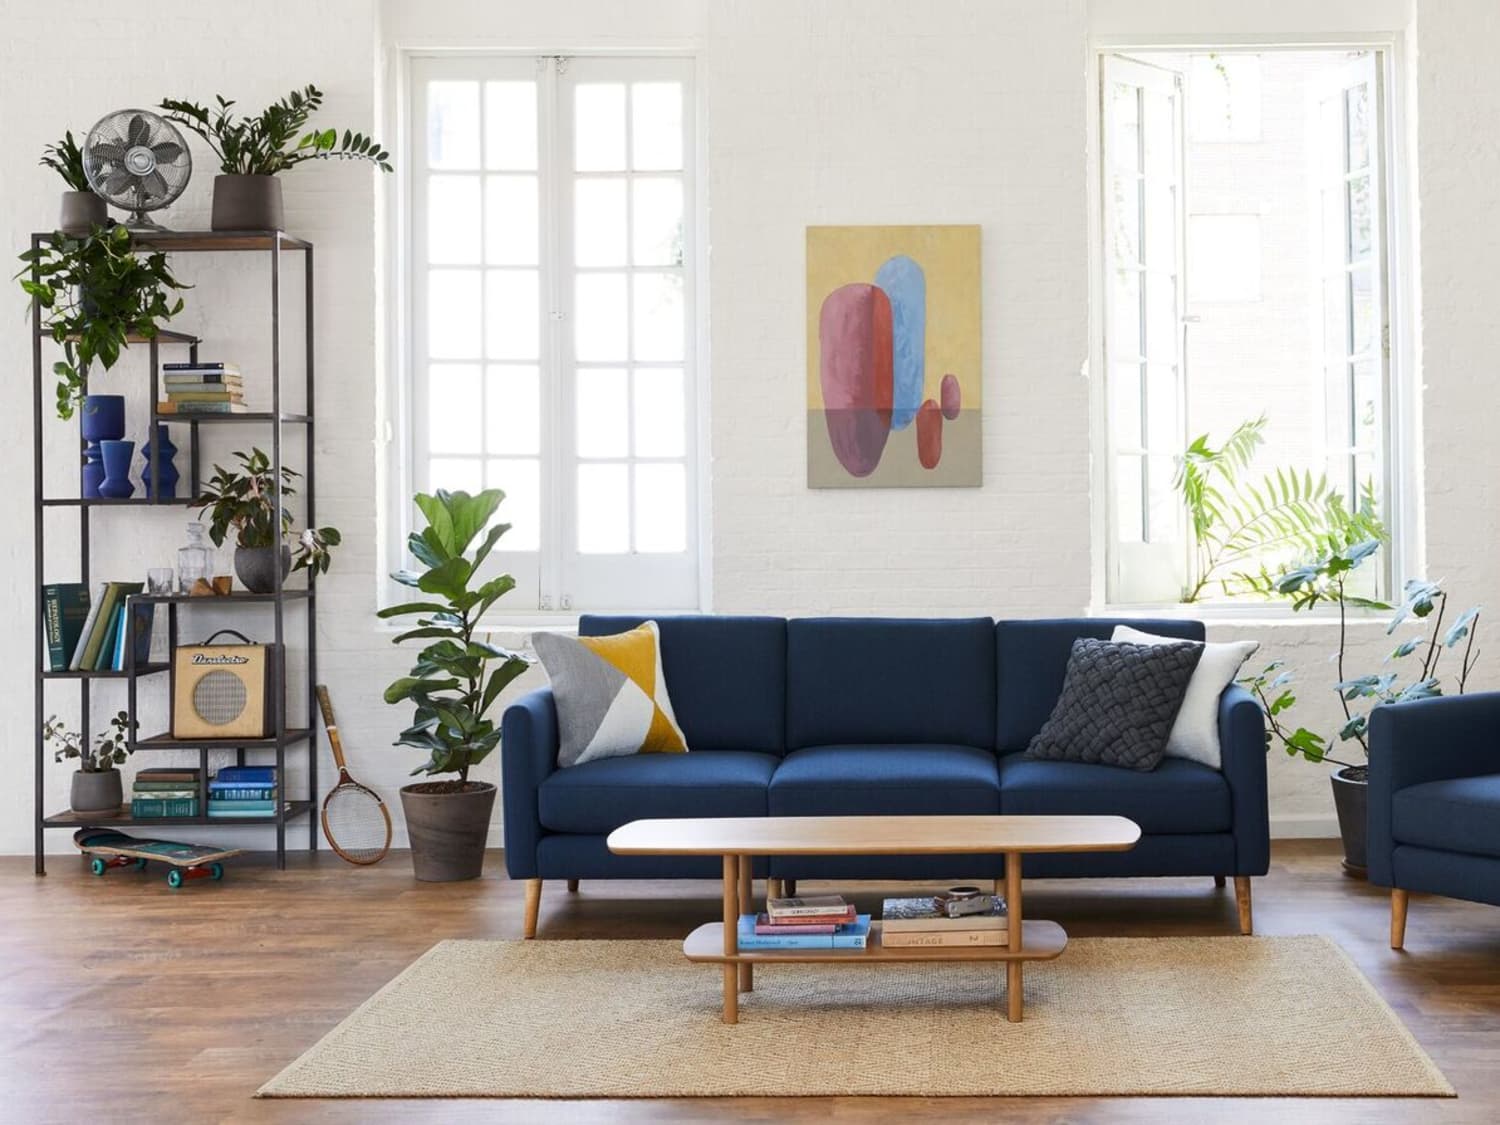 A modern living room with a navy blue couch, a wooden coffee table, and various potted plants. There's a geometric painting on the white brick wall between two large windows. A shelving unit holds books, decor, and a metal fan. The floor is wooden.